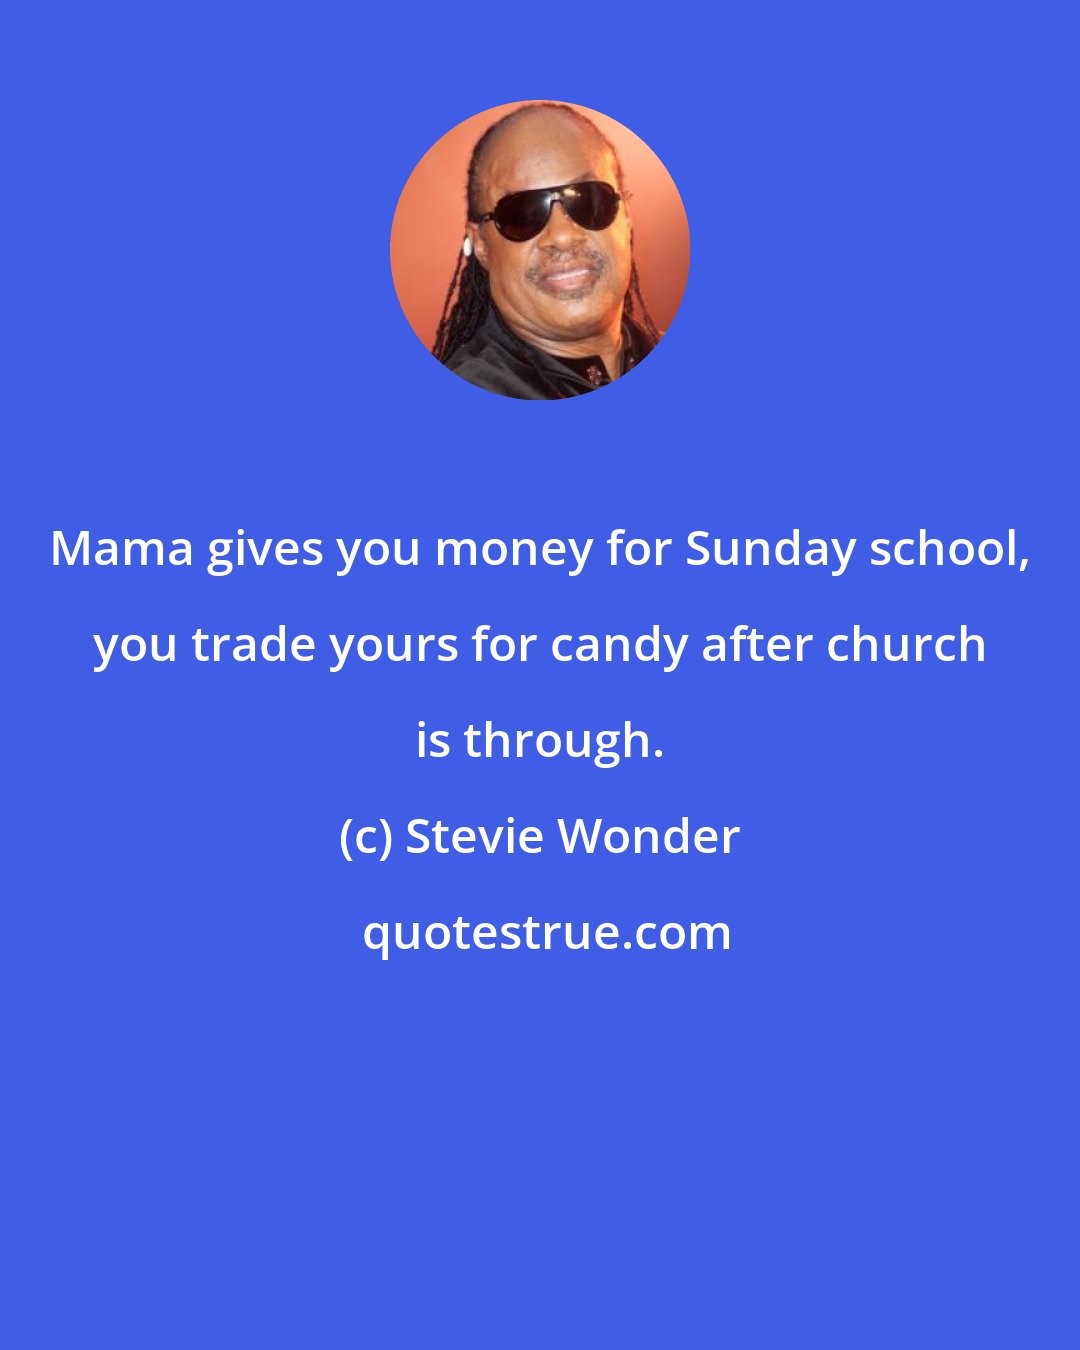 Stevie Wonder: Mama gives you money for Sunday school, you trade yours for candy after church is through.